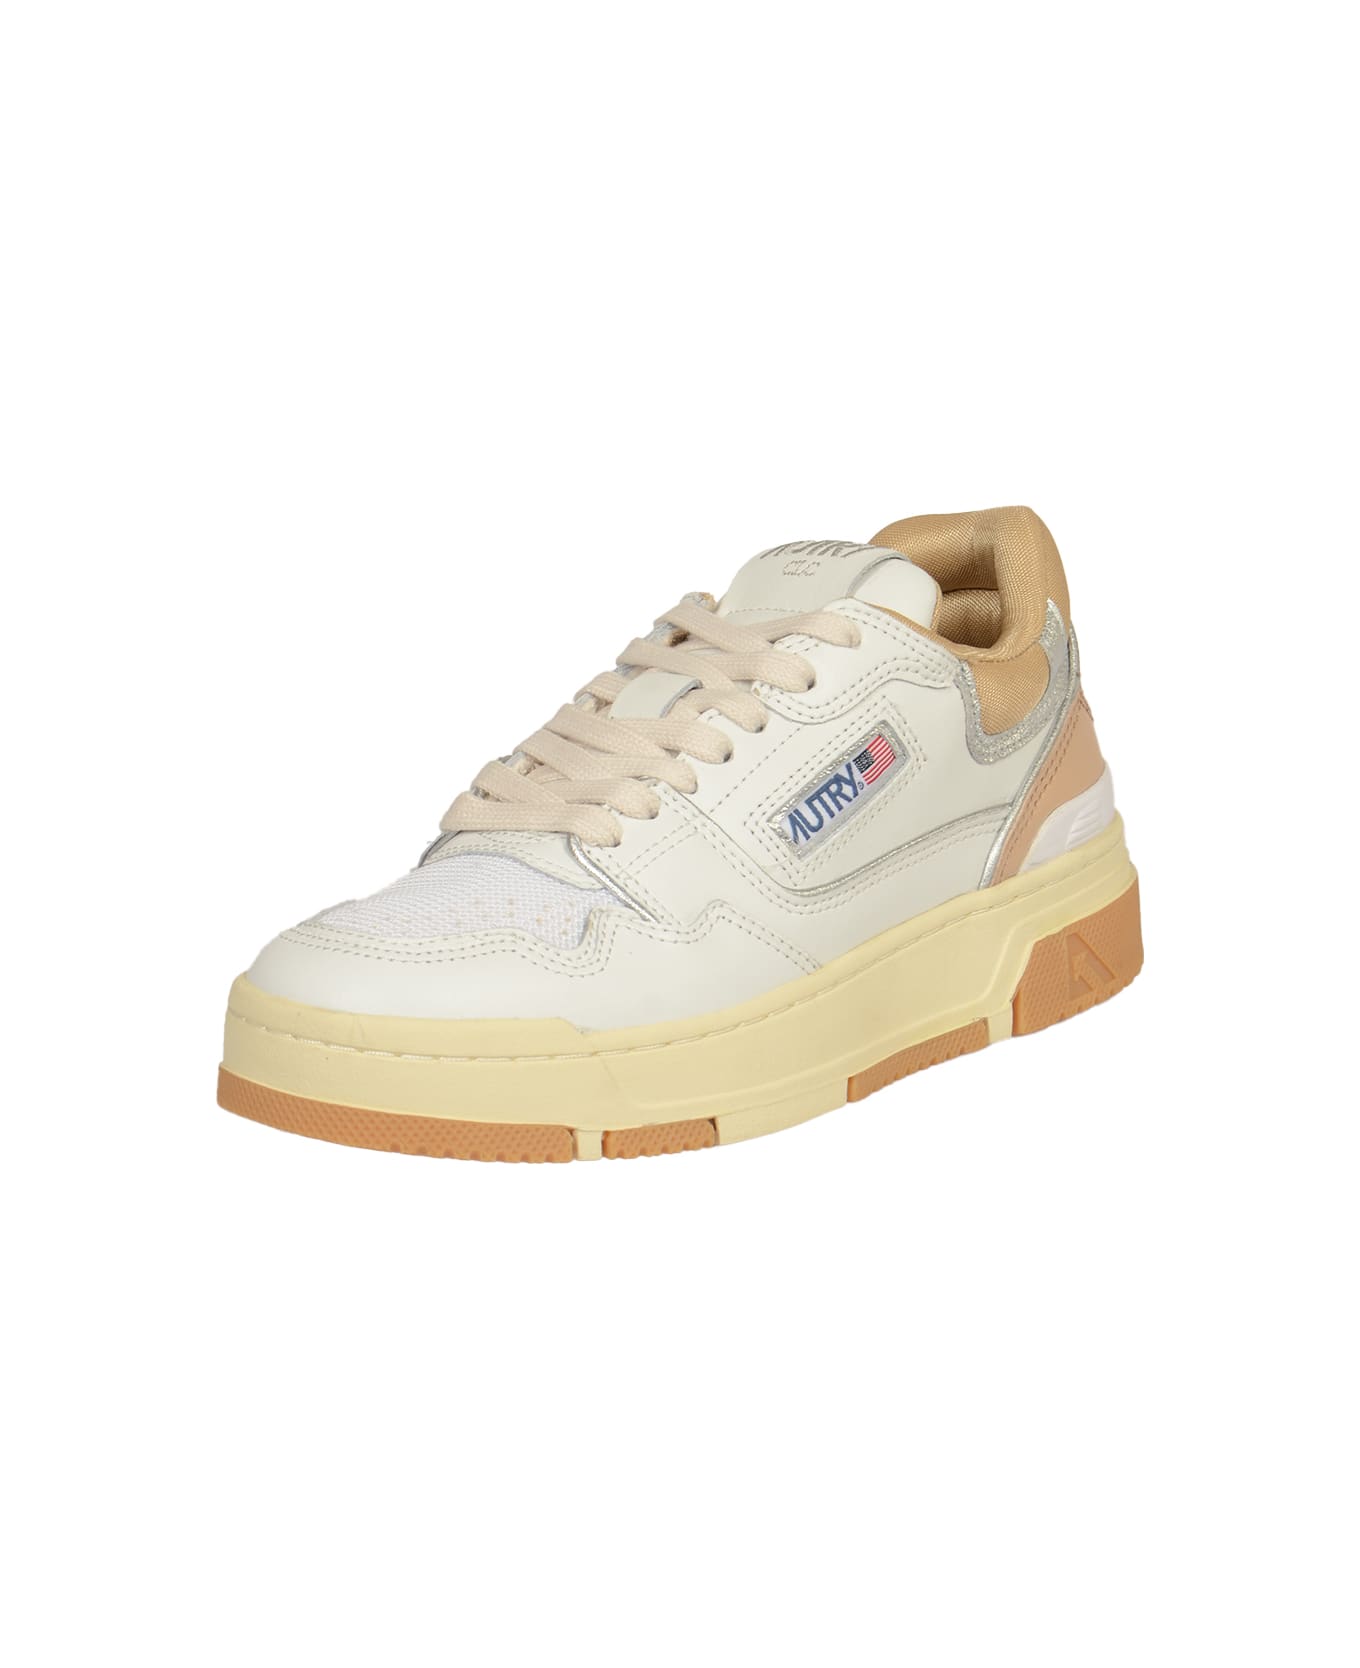 Autry Clc Low Sneakers - Wht/silv/candging